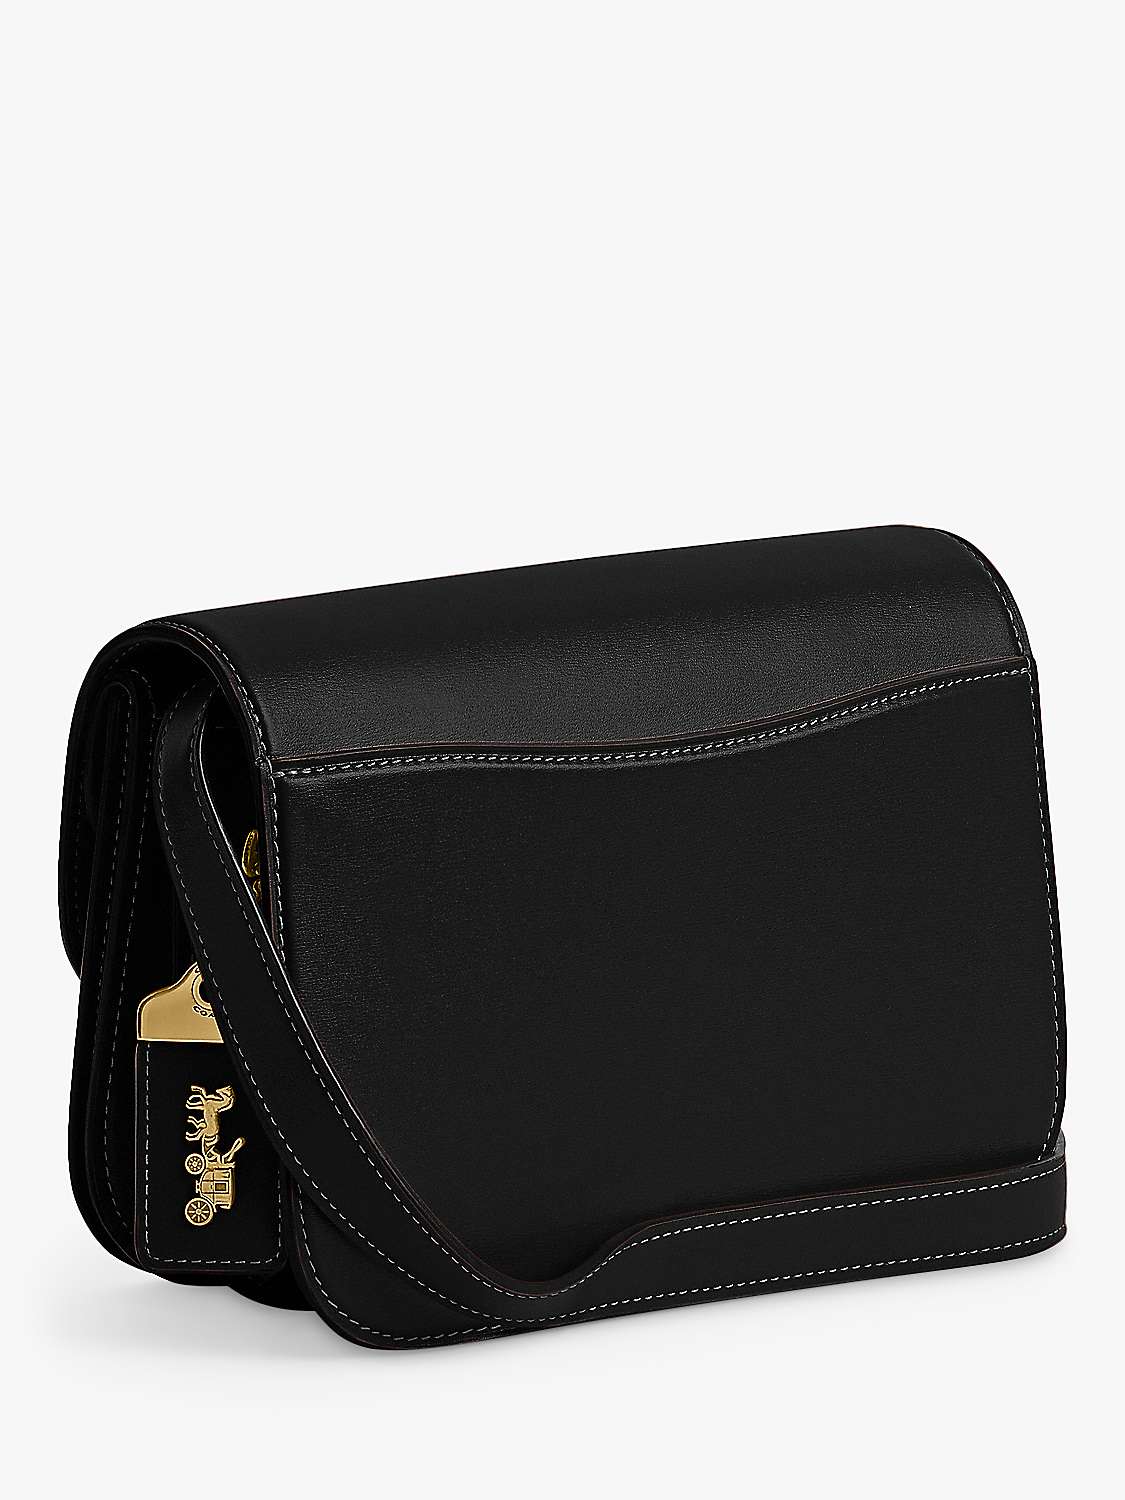 Buy Coach Idol Leather Flapover Chain Strap Shoulder Bag Online at johnlewis.com